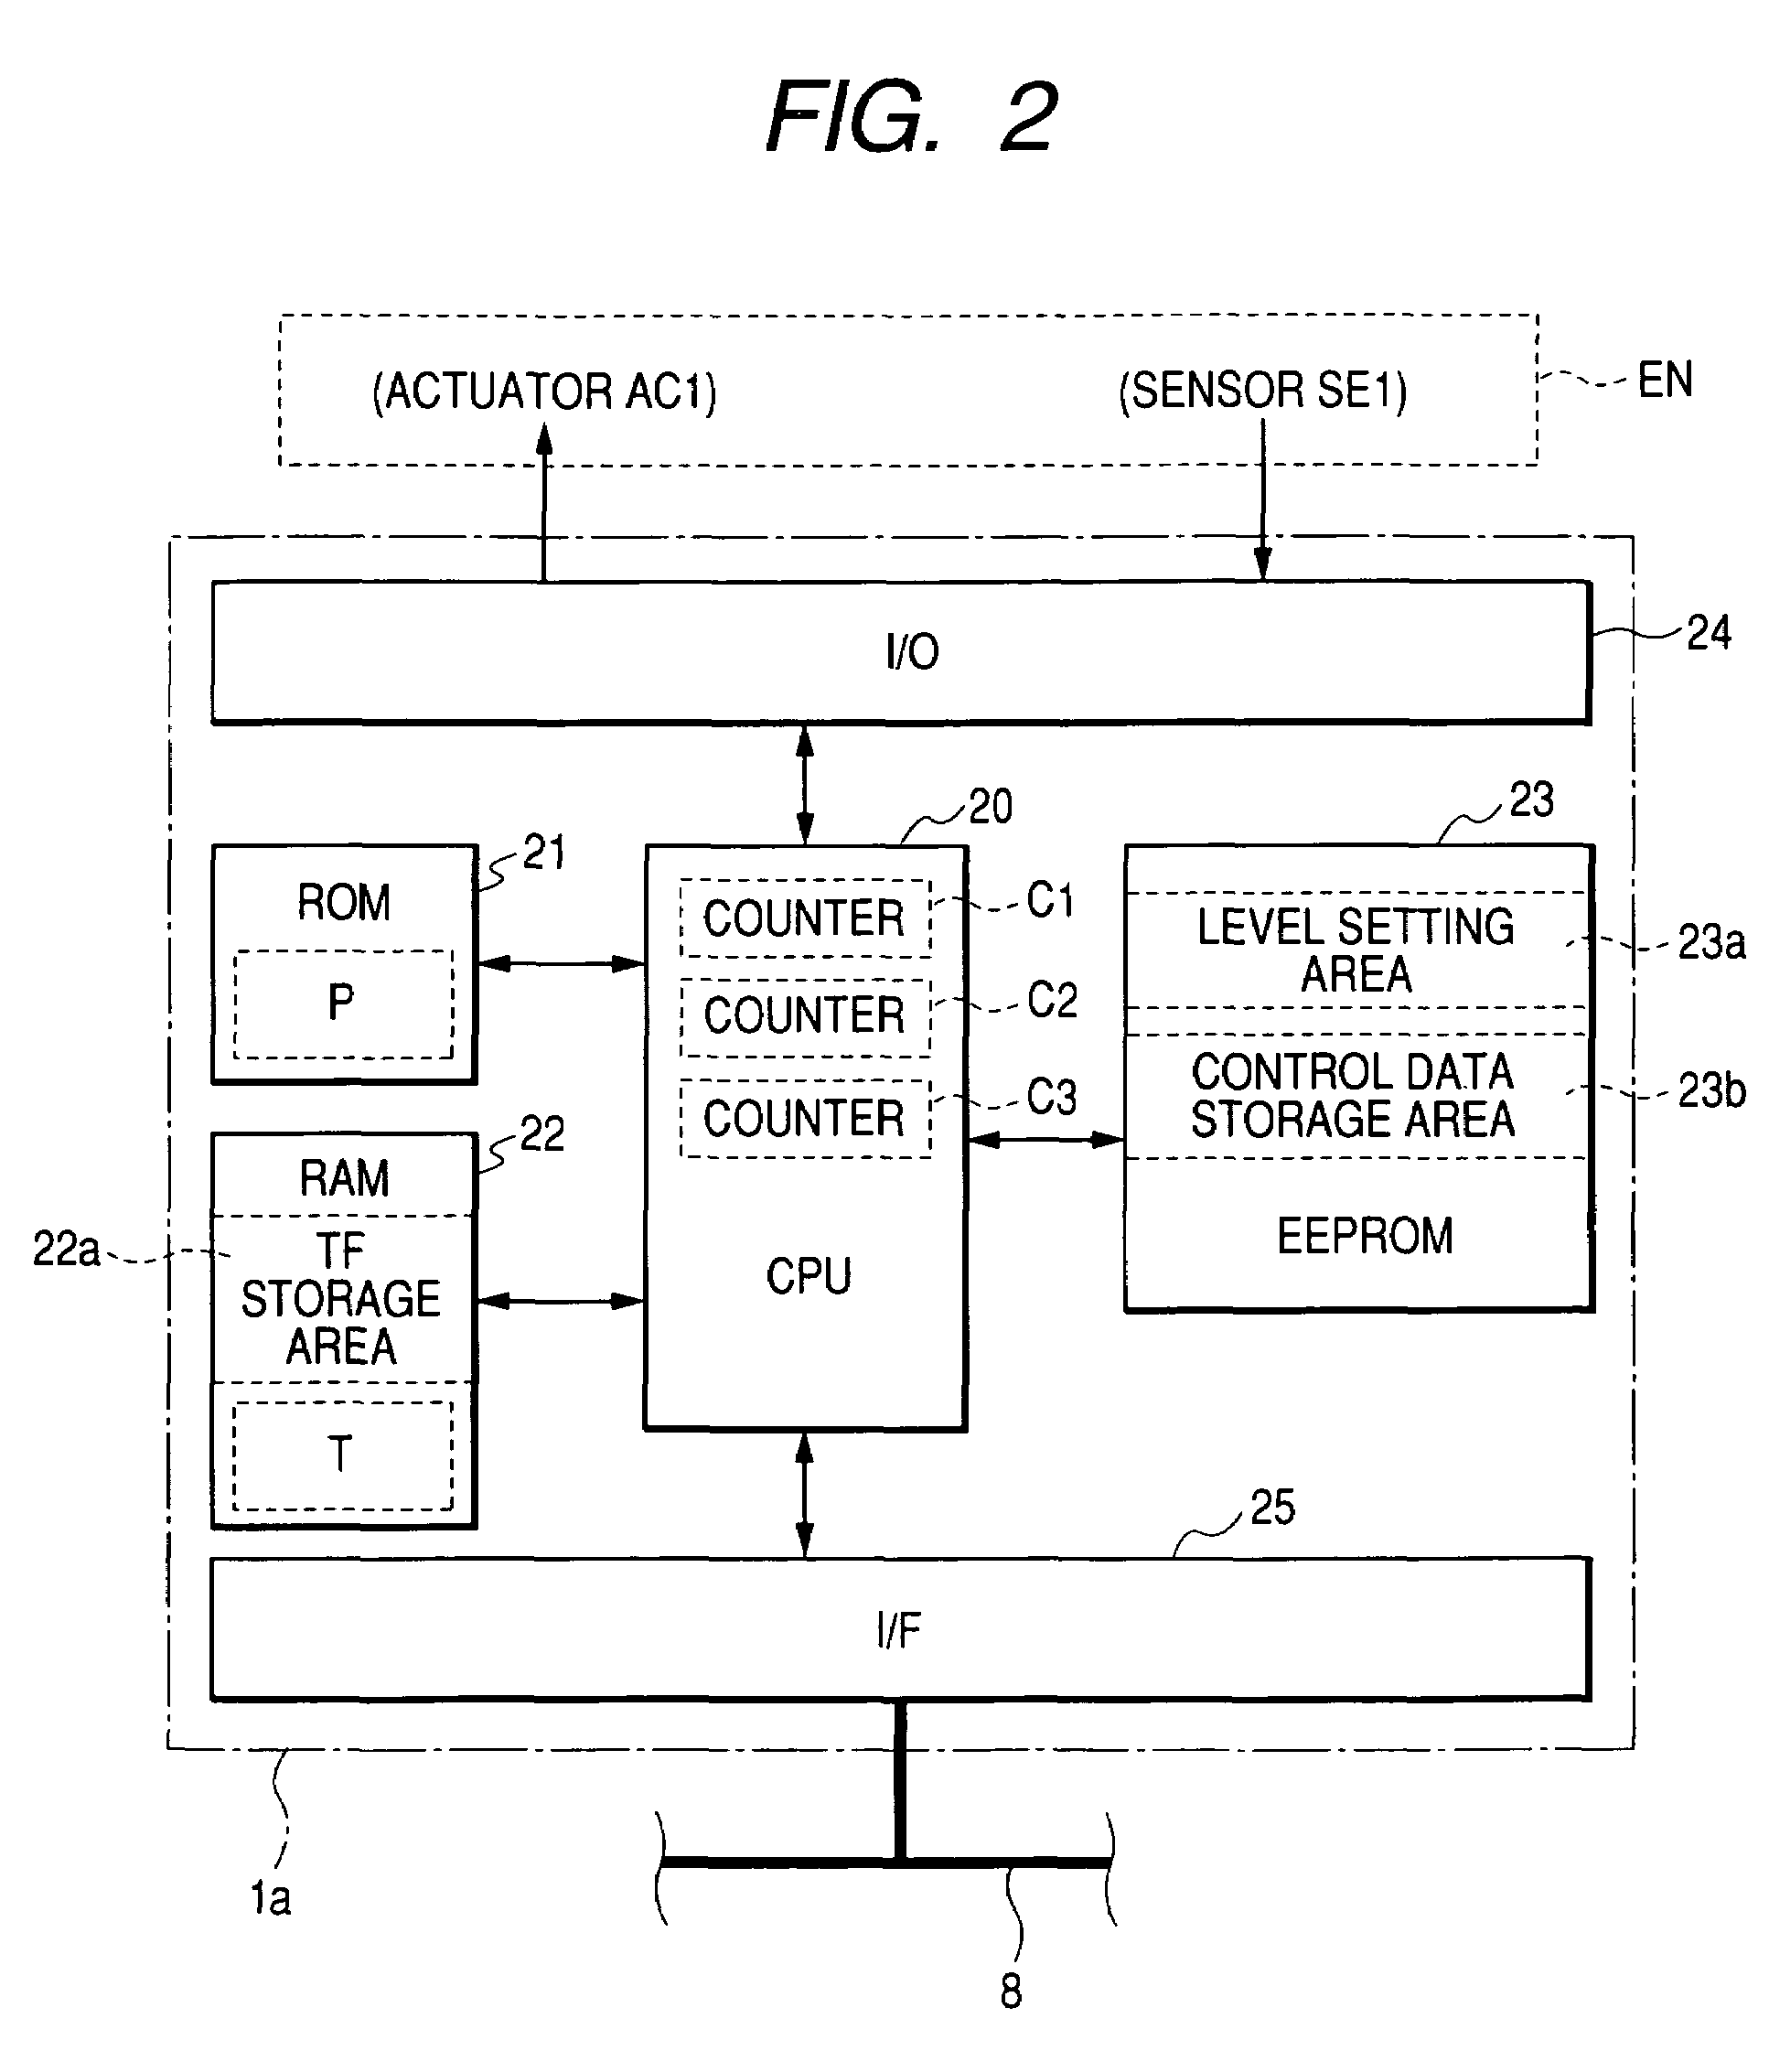 In-vehicle control apparatus communicably coupled through a communication line